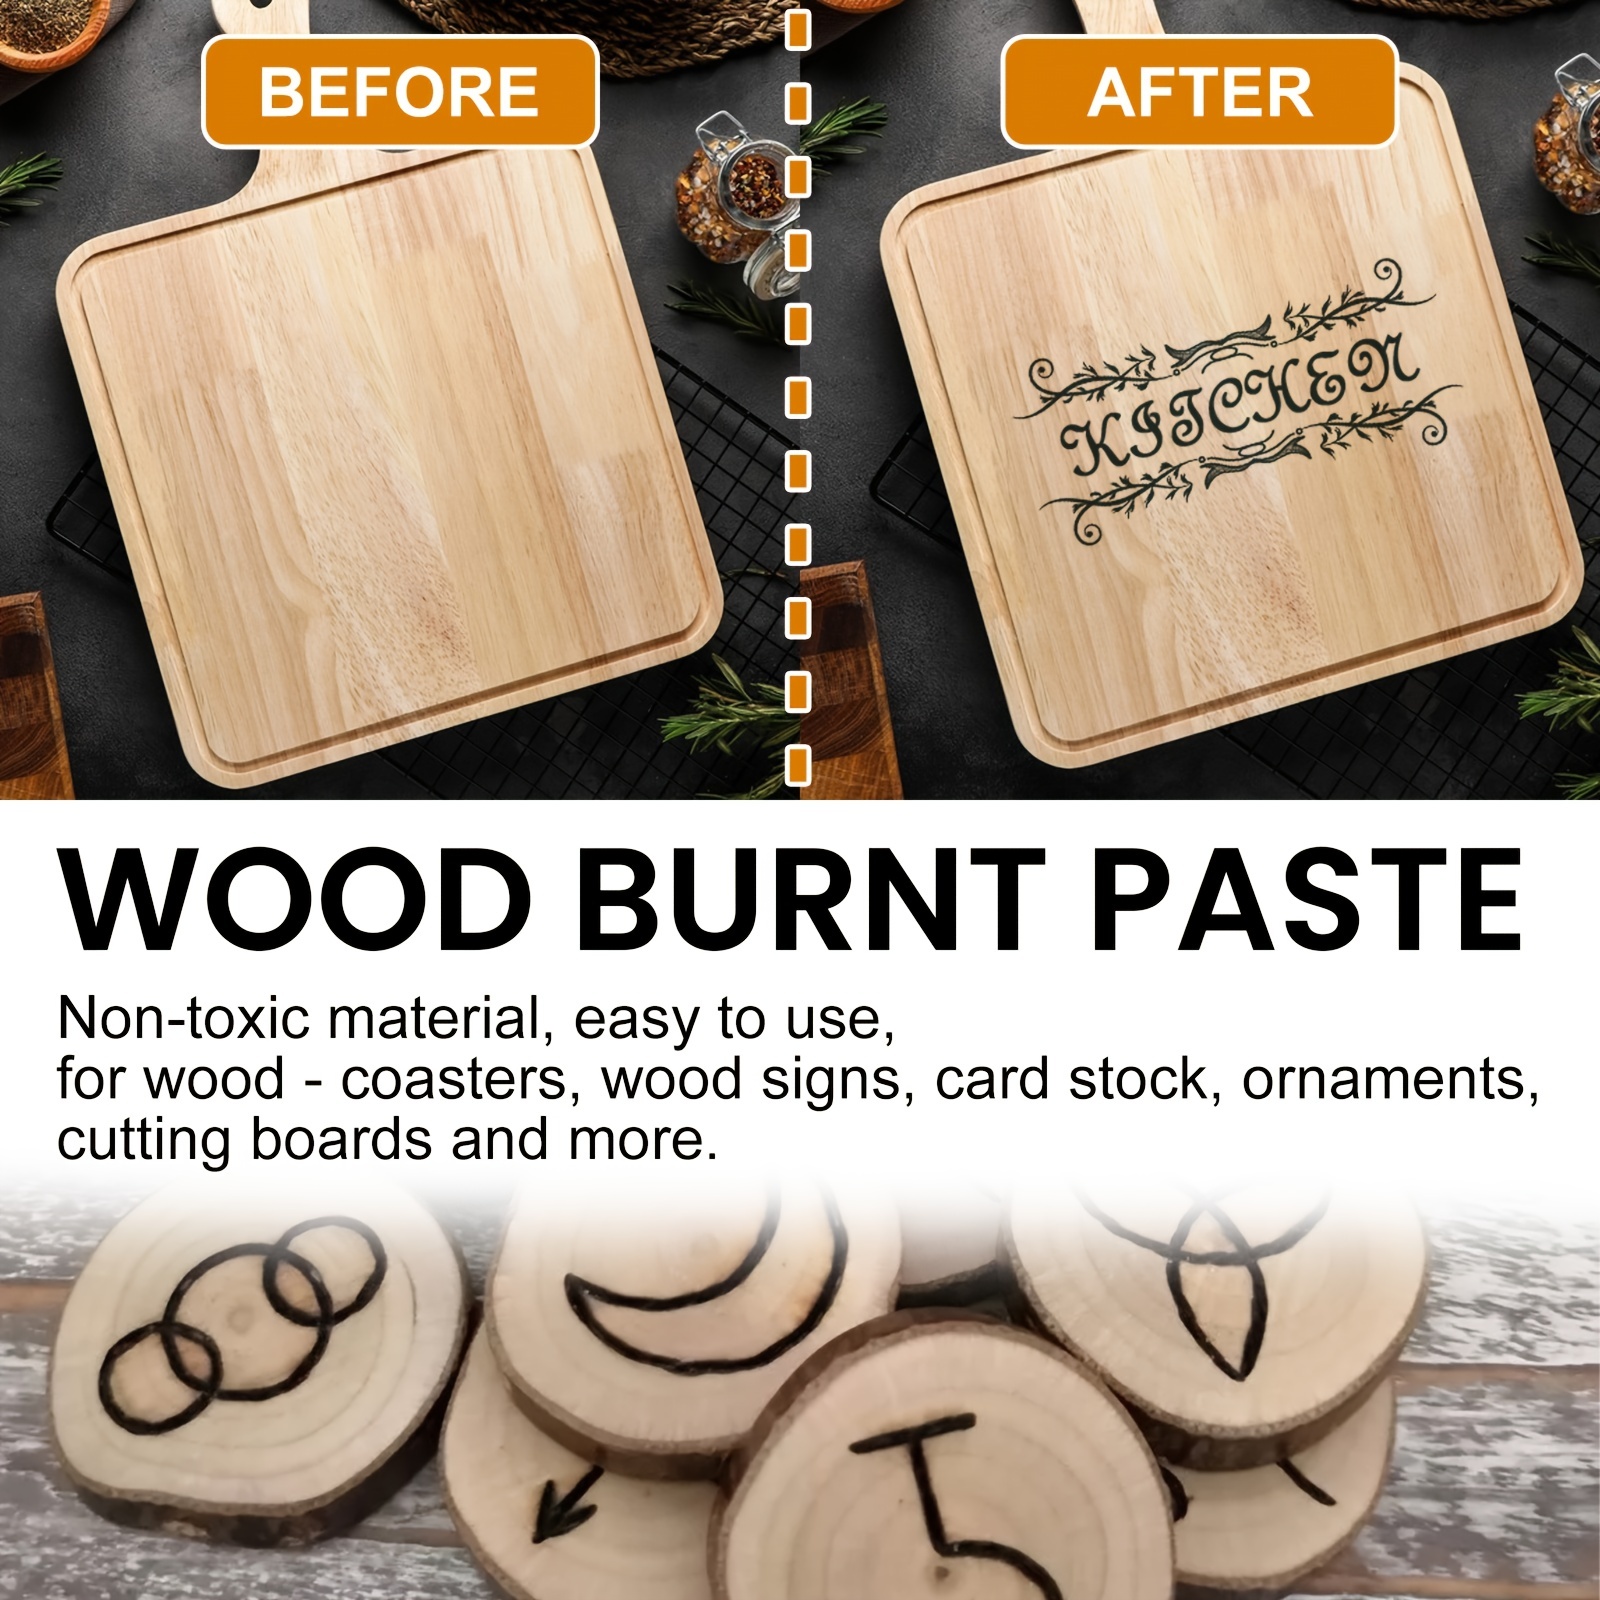 Torch Paste - The Original Wood Burning Paste | Made in USA | Heat  Activated Non-Toxic Paste for Crafting & Stencil Wood Burning | Accurately  & Easily